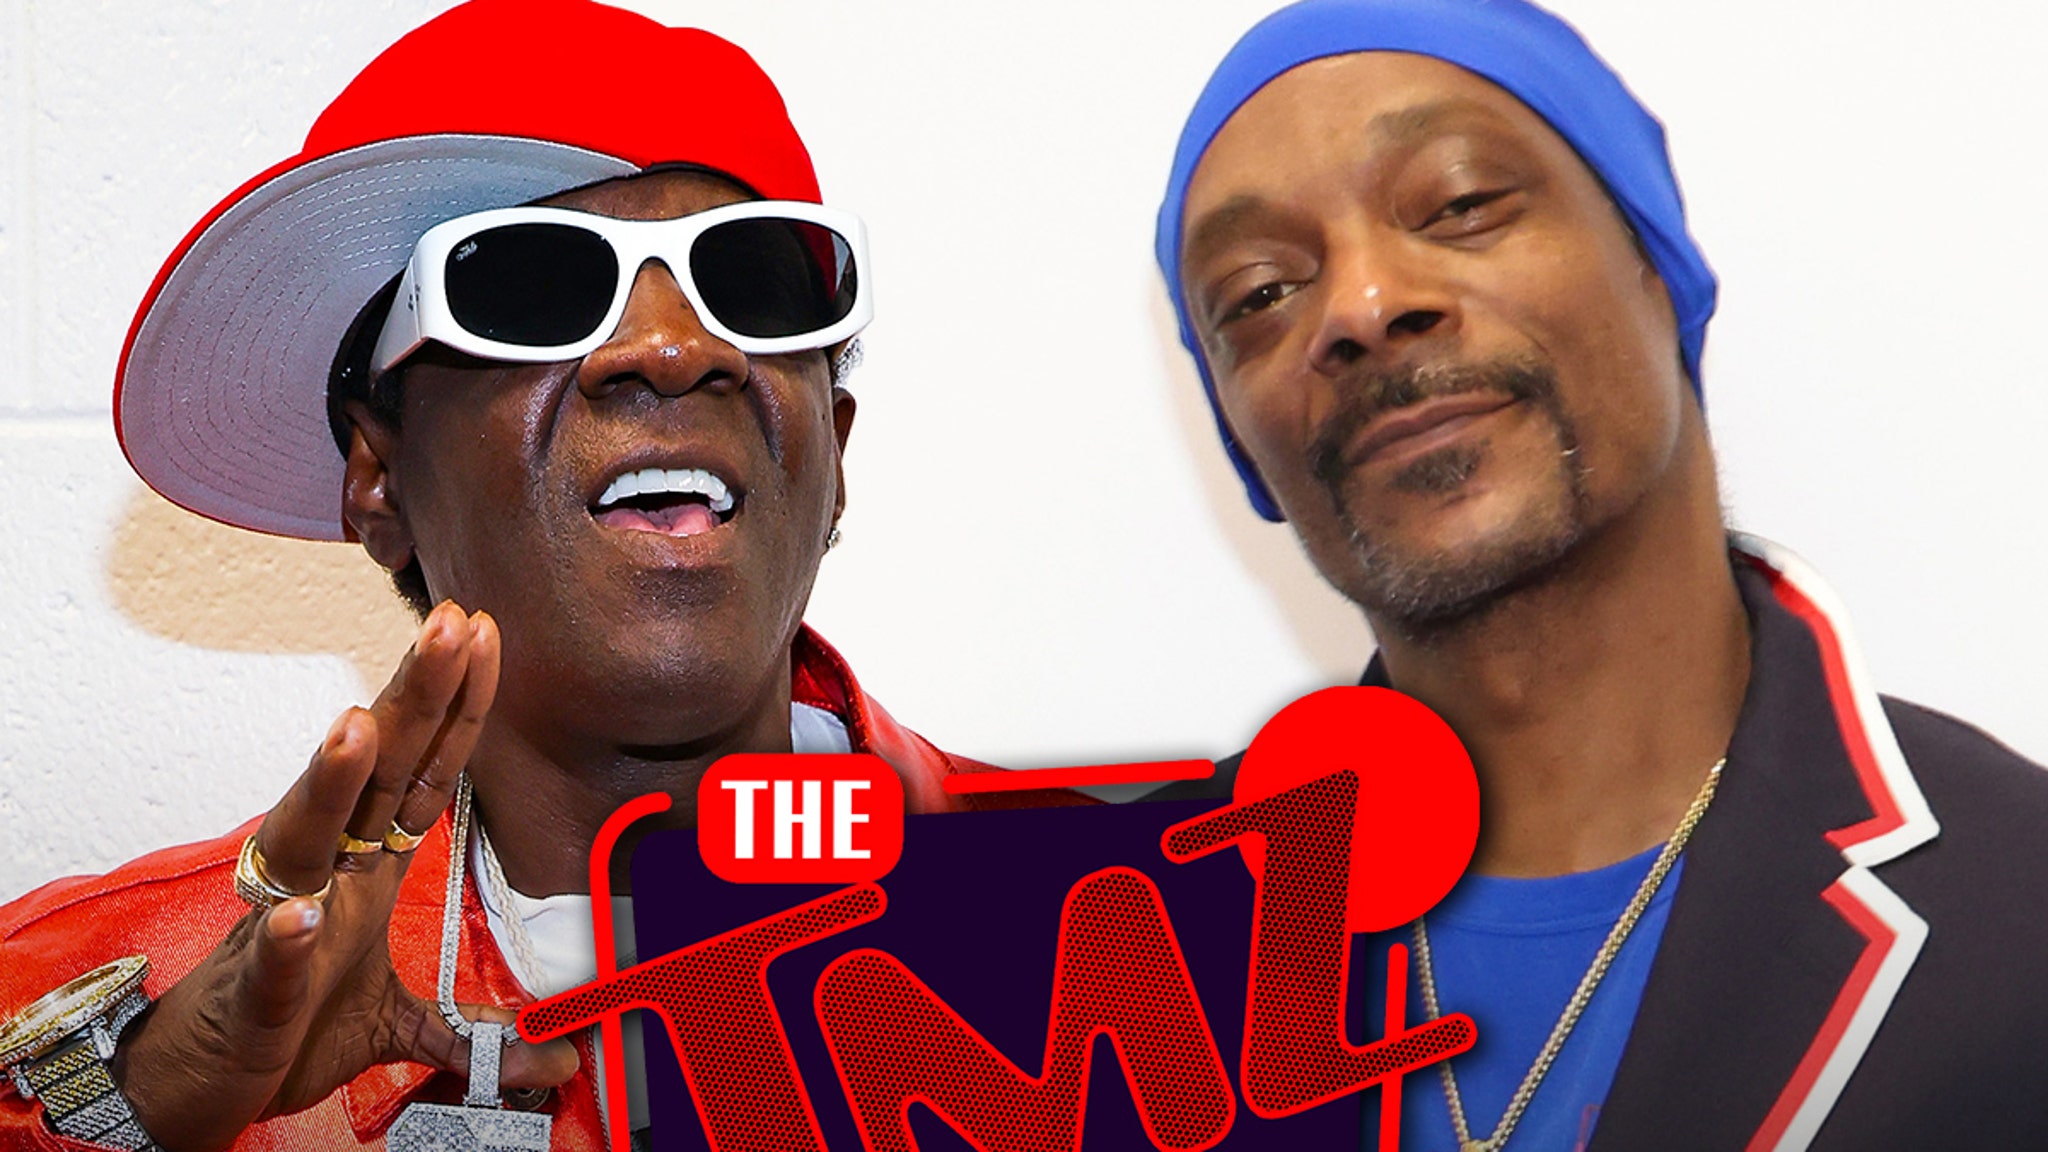 Flavor Flav Says Snoop Dogg’s Olympic Torchbearer Role Is Historic Moment For Rap Music